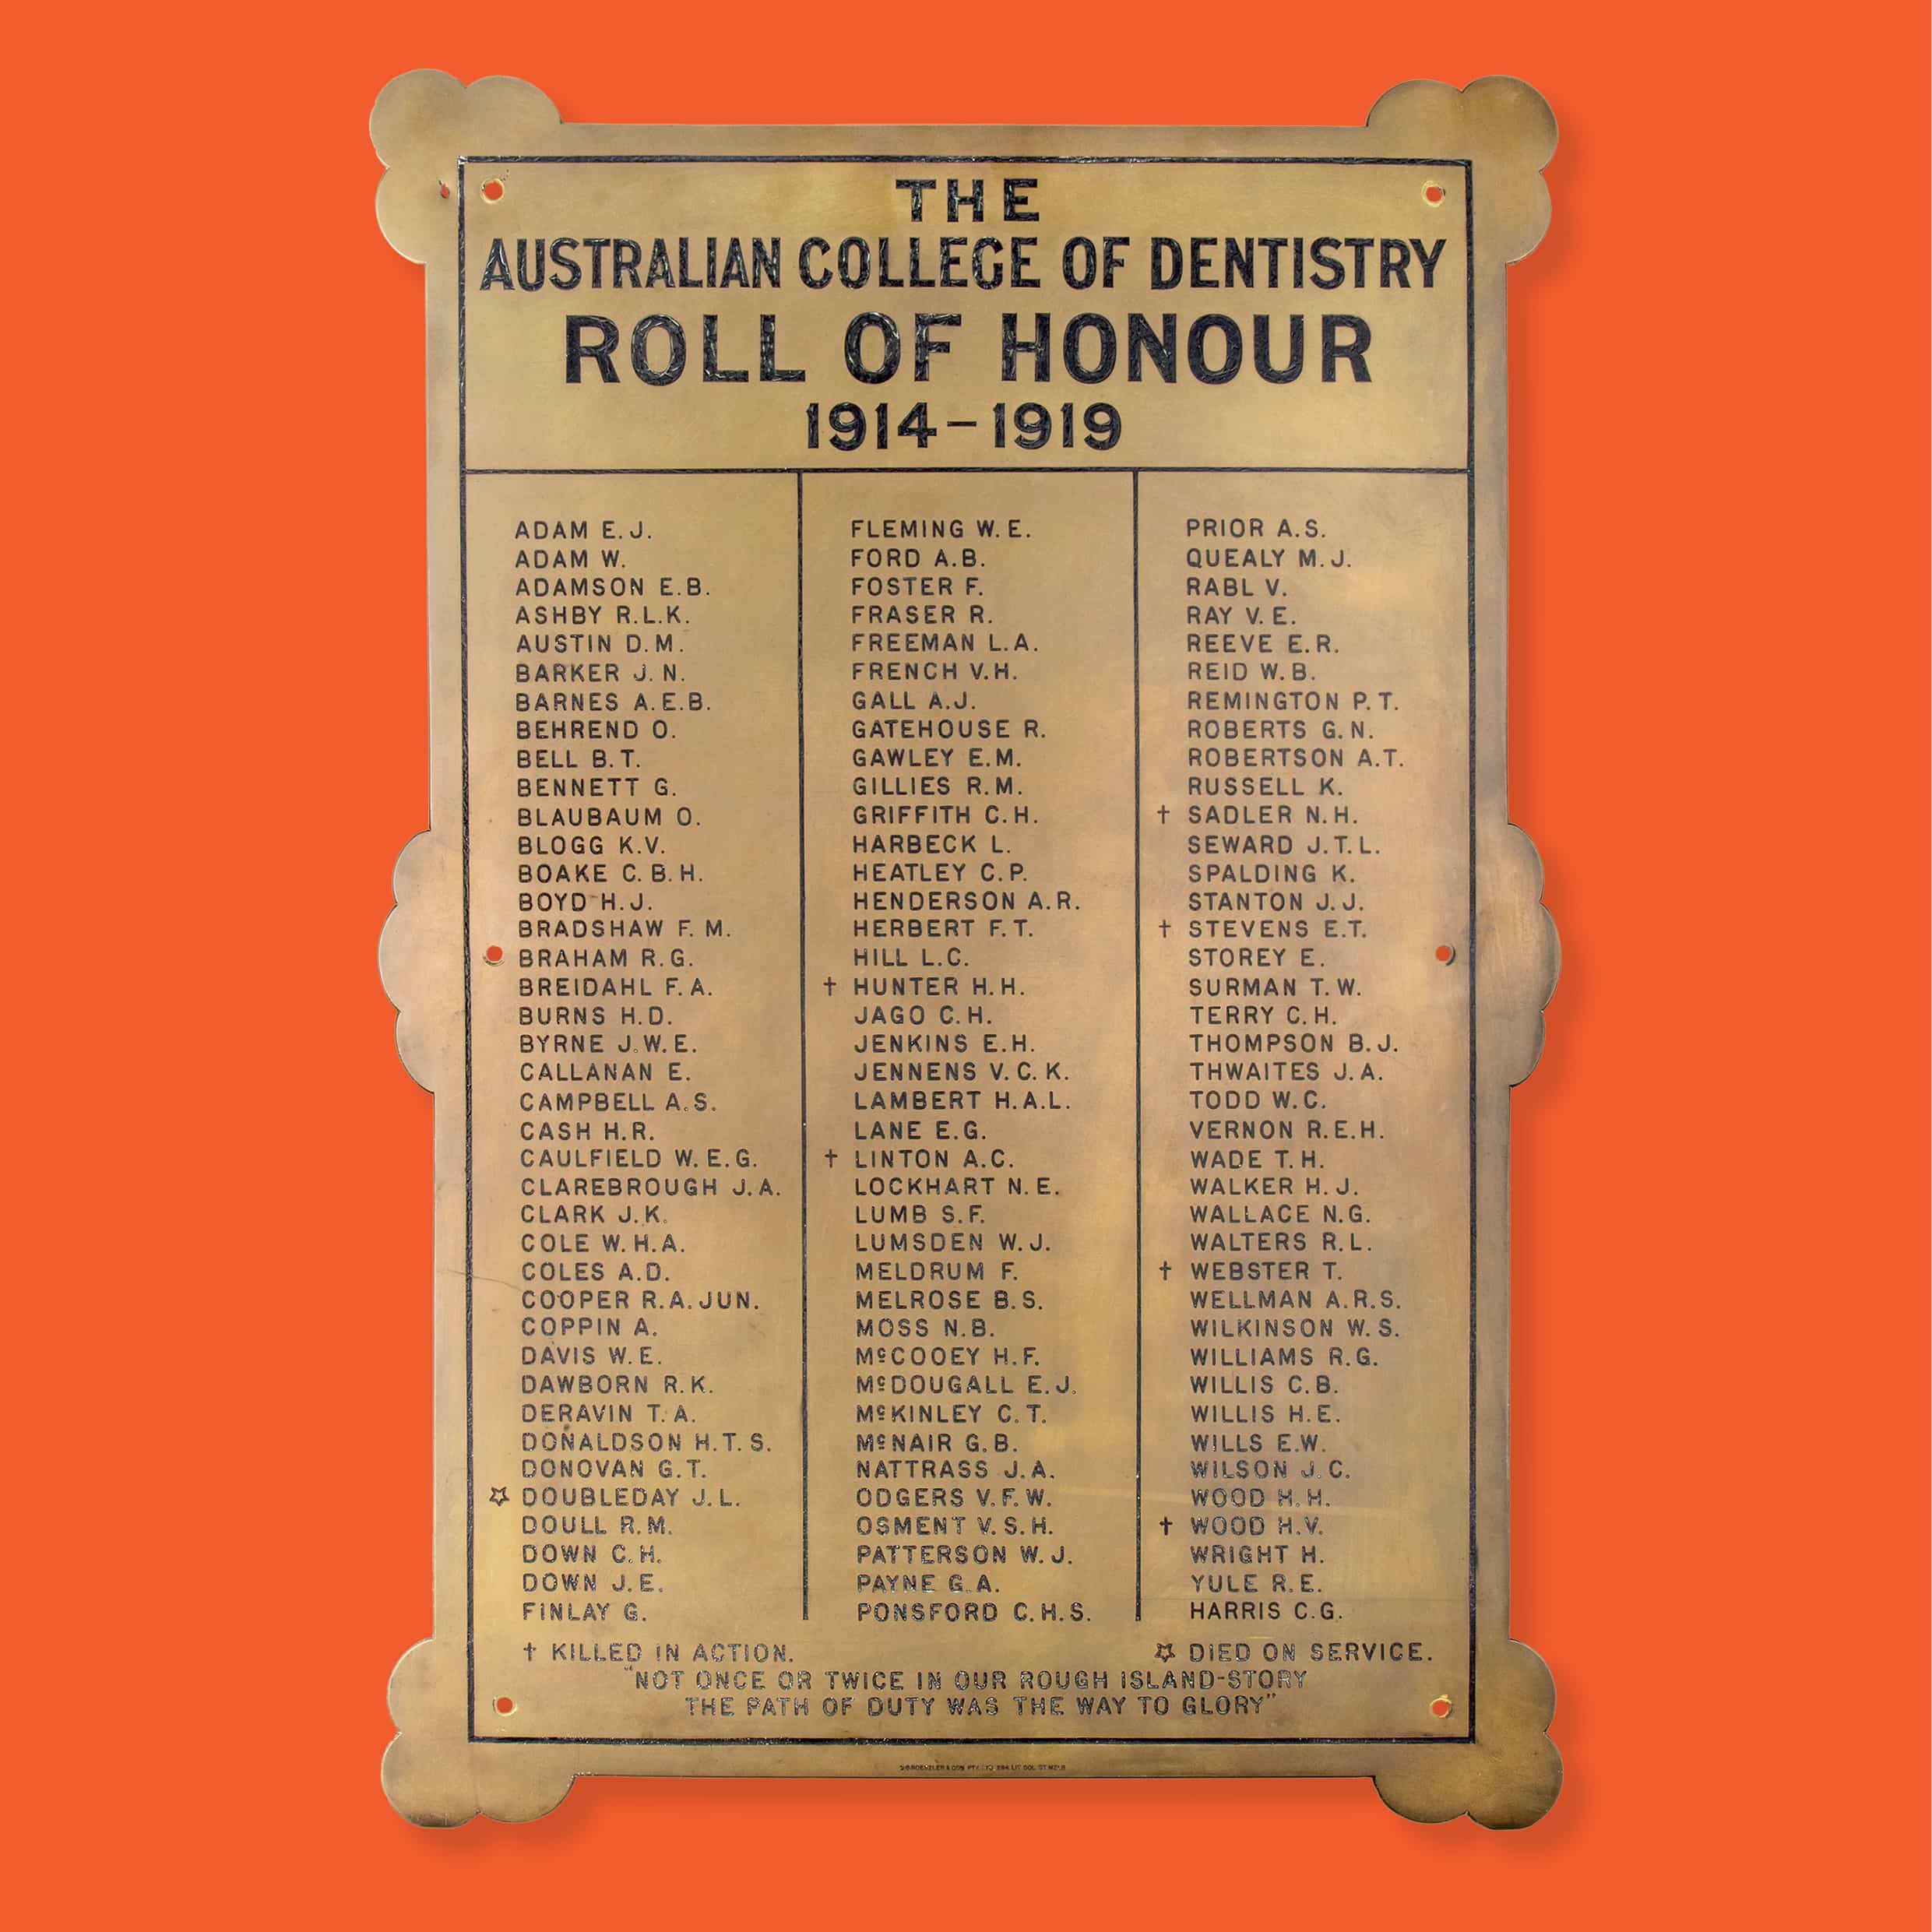 The Australian College of Dentistry roll of honour 1914–1919, c. 1920, brass, 76.0 × 55.0 cm. HFADM 1705, transferred from the Australian College of Dentistry 1963, Henry Forman Atkinson Dental Museum, University of Melbourne.
